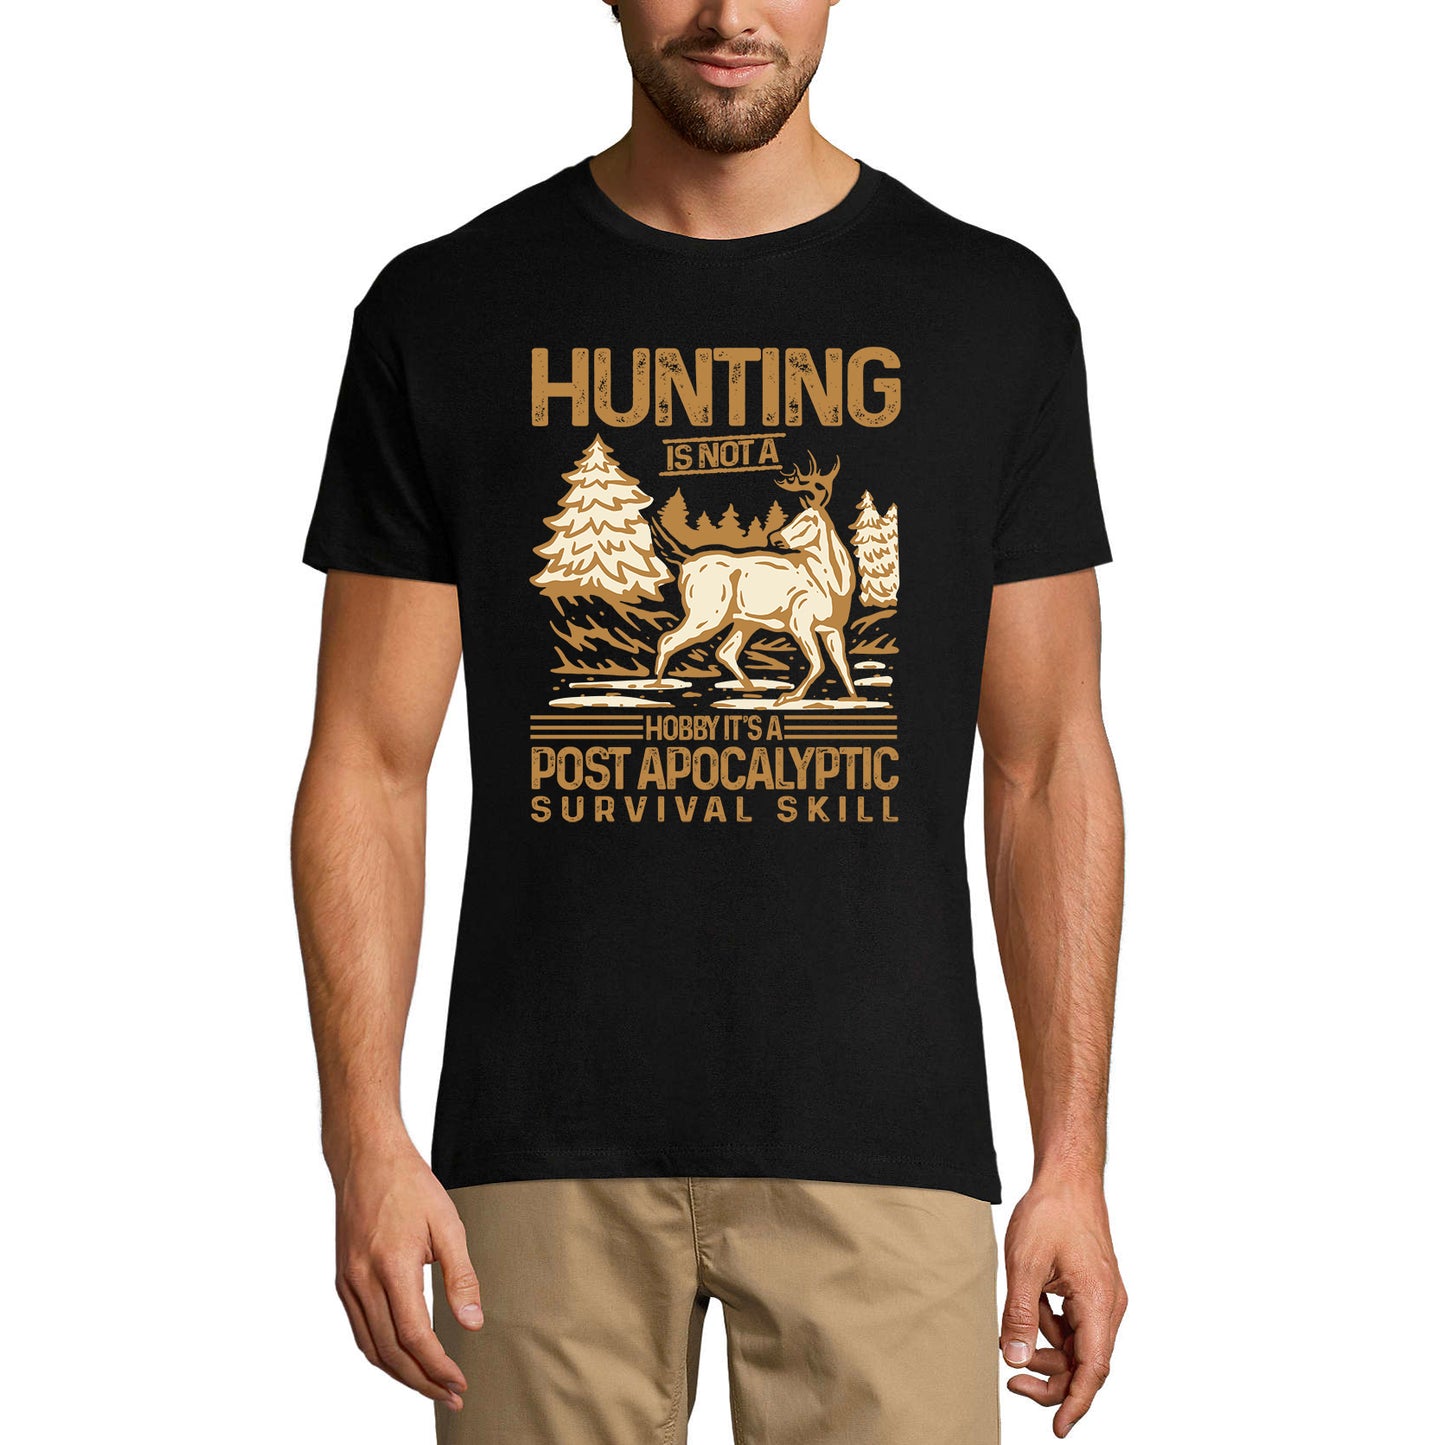 ULTRABASIC Men's T-Shirt Hunting is Not a Hobby It's Post Apocalyptic Survival Skill - Hunter Tee Shirt